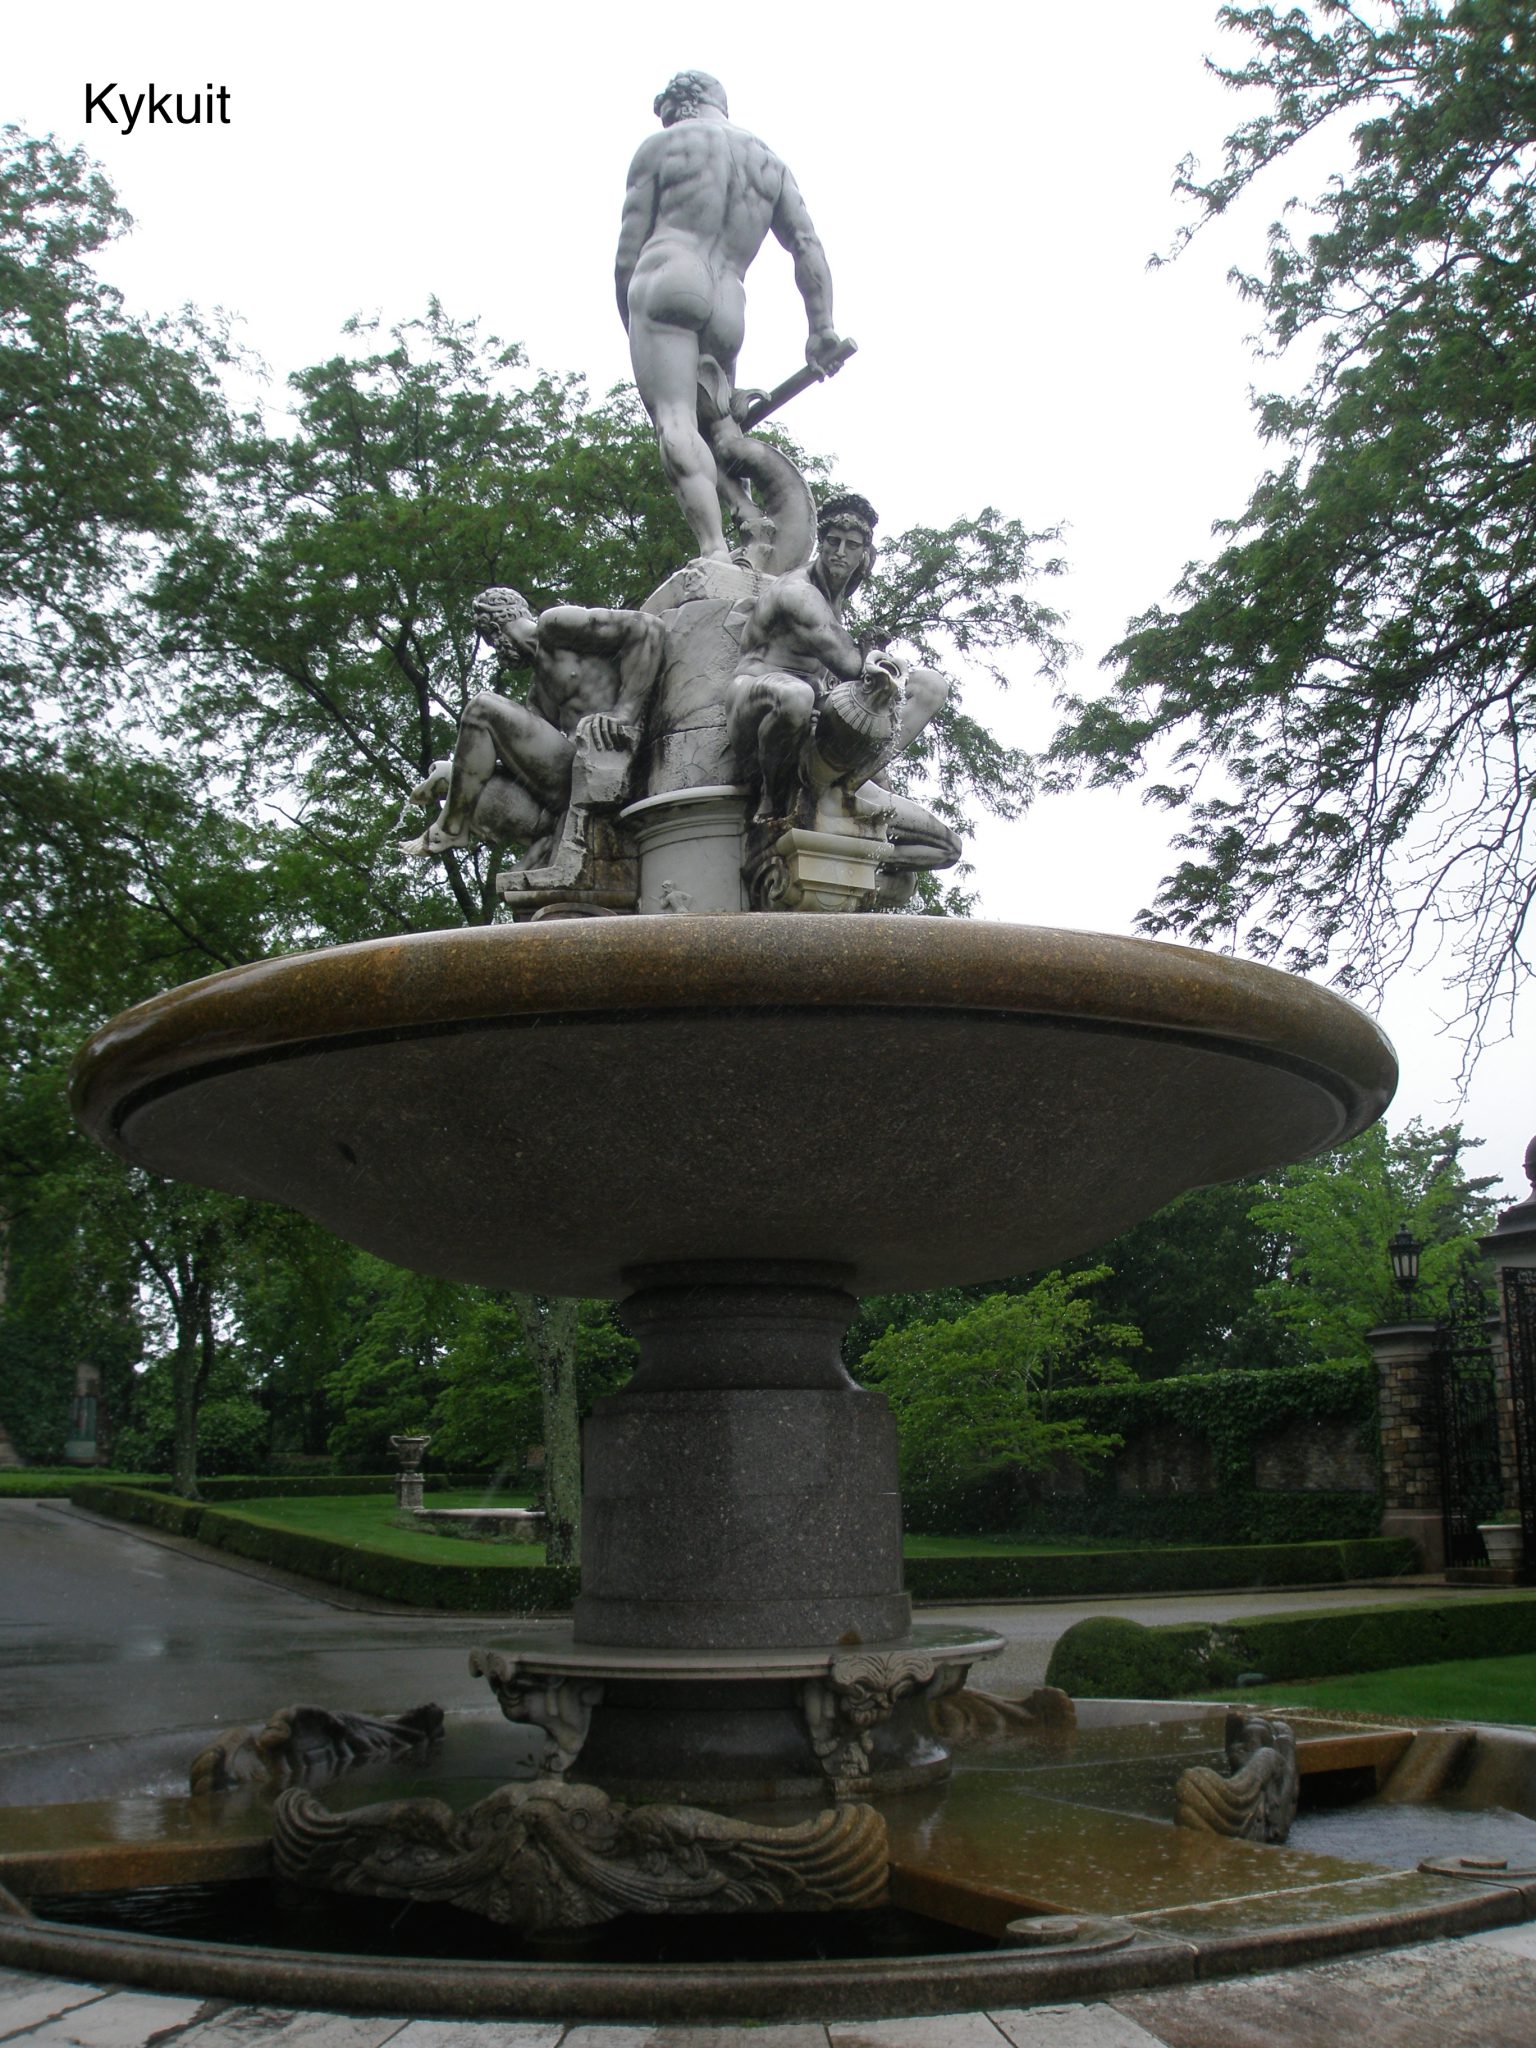 A closer view of the Oceanus Fountain, which was added to Kykuit's Forecourt in 1914.